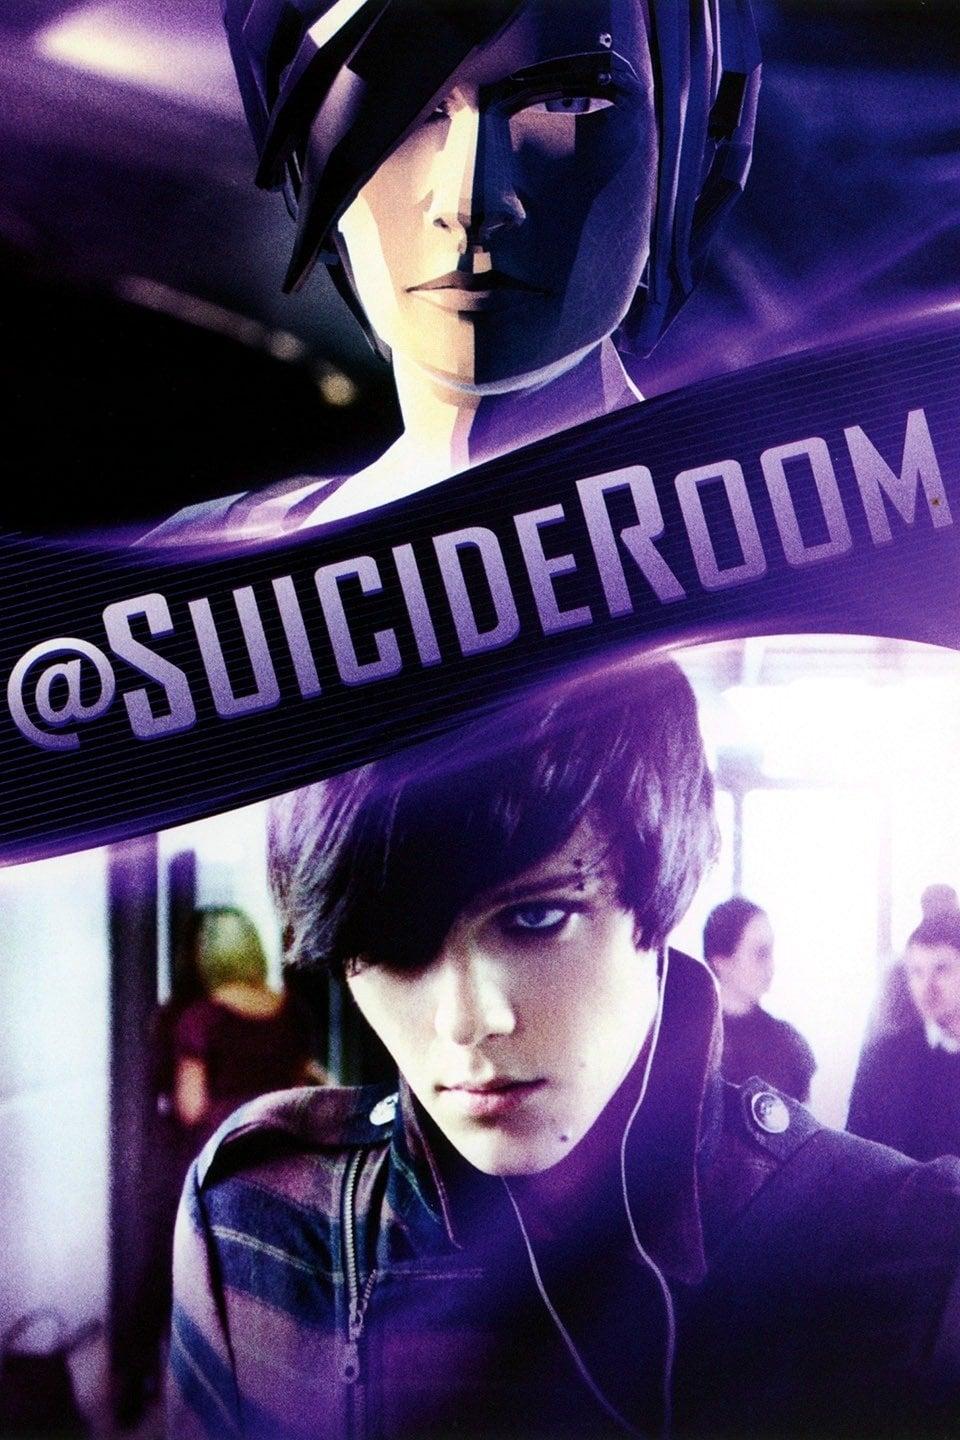 Suicide Room poster